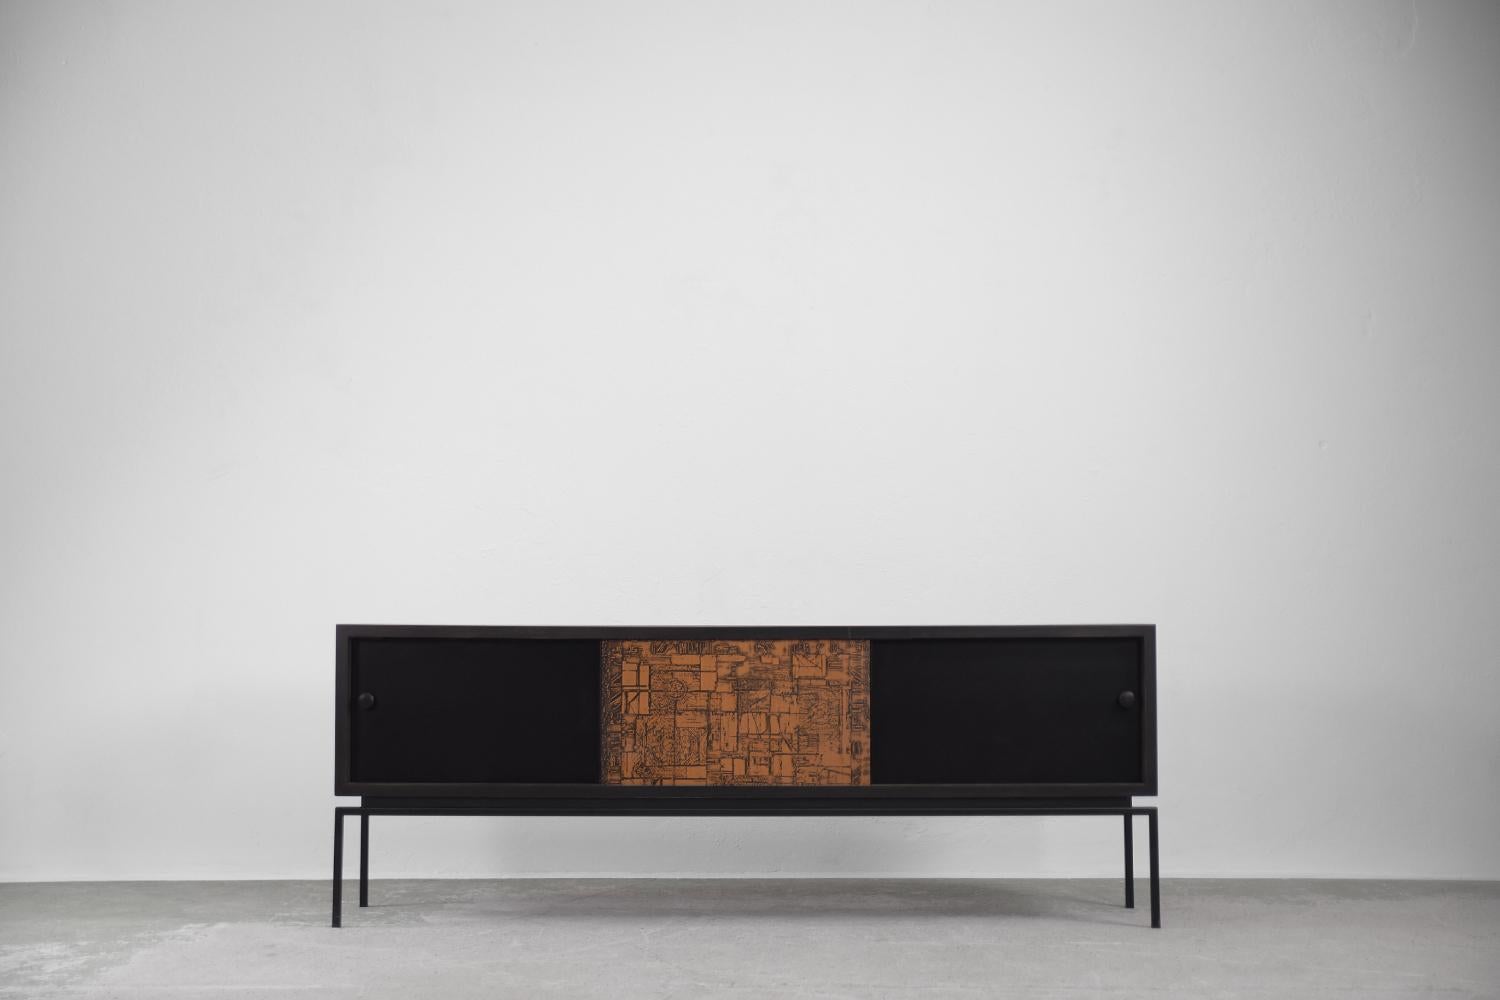 This modernist sideboard comes from Italy and was made during the 1970s. The chest is made of walnut wood with a rare, highly valued grain. The characteristic swirls and matting of the grain lines, together with the deep colors, create the illusion